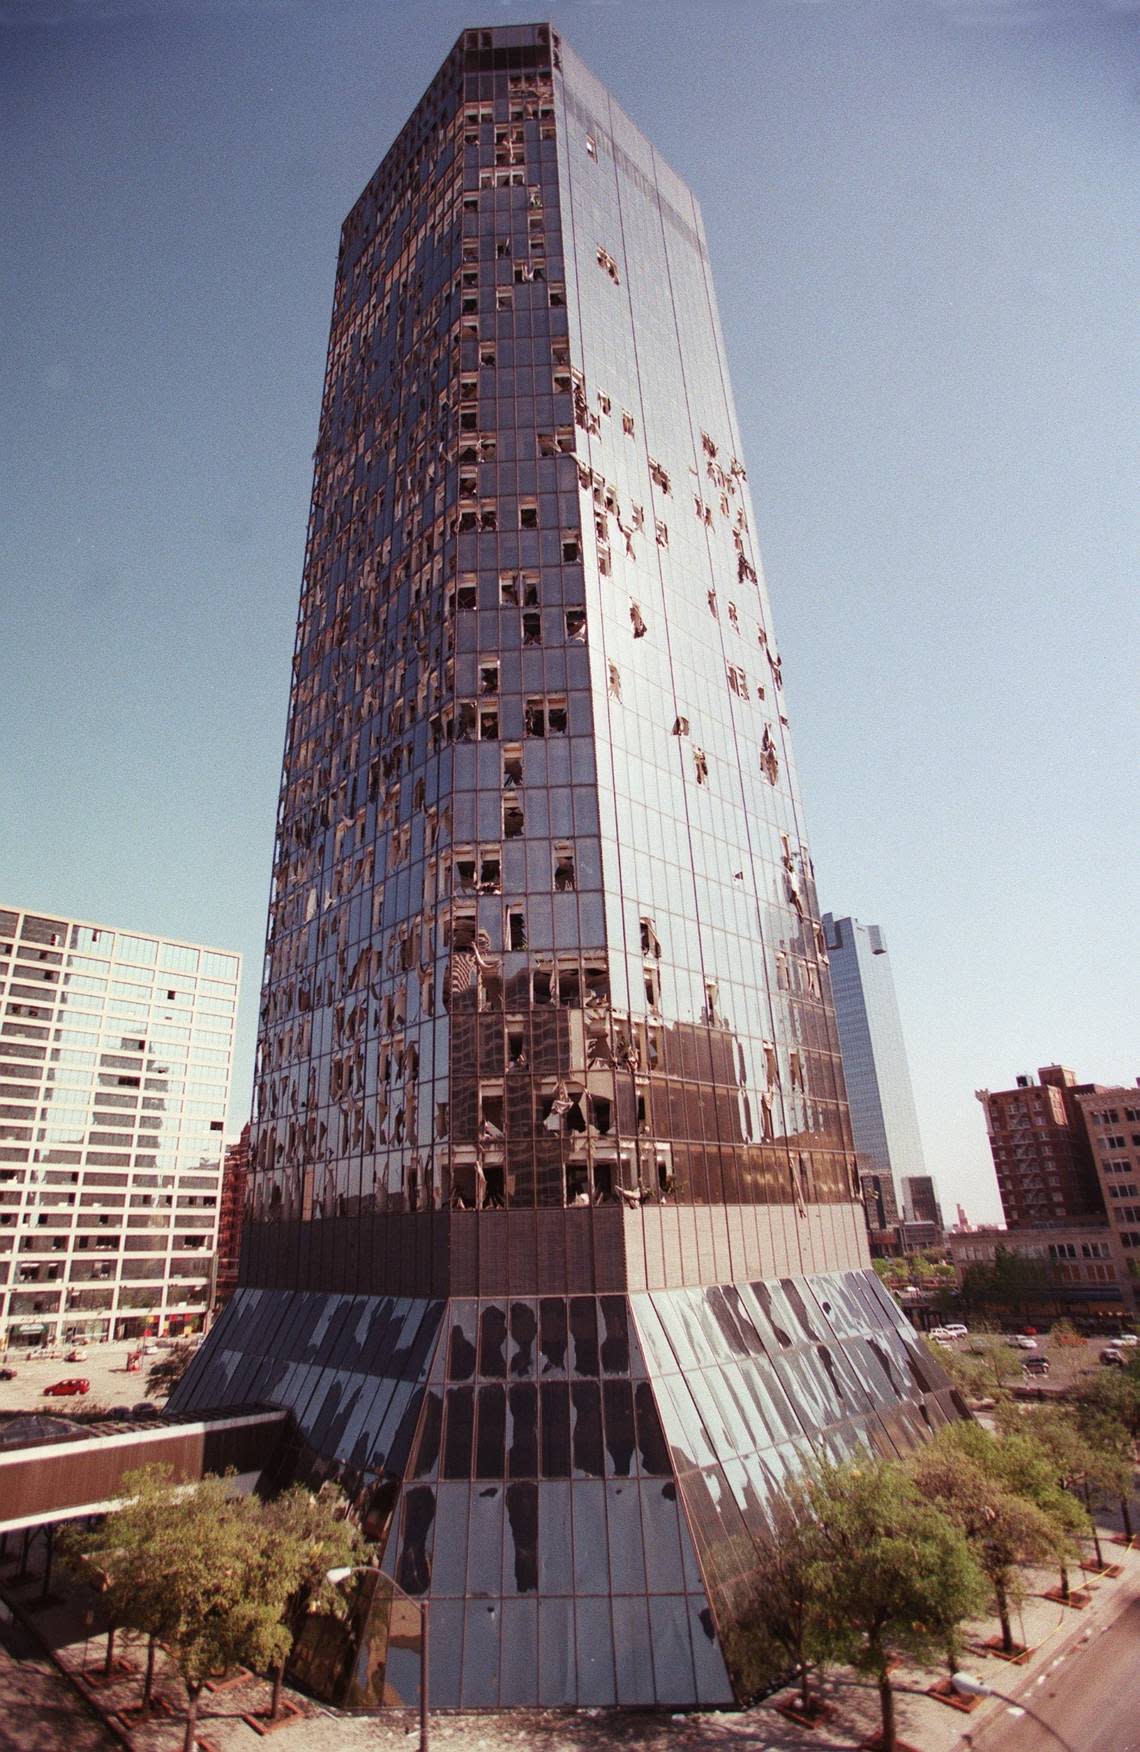 The Bank One tower shows damage the day after a tornado hit Fort Worth on March 28, 2000. Years later, the restored building would become The Tower condominiums.